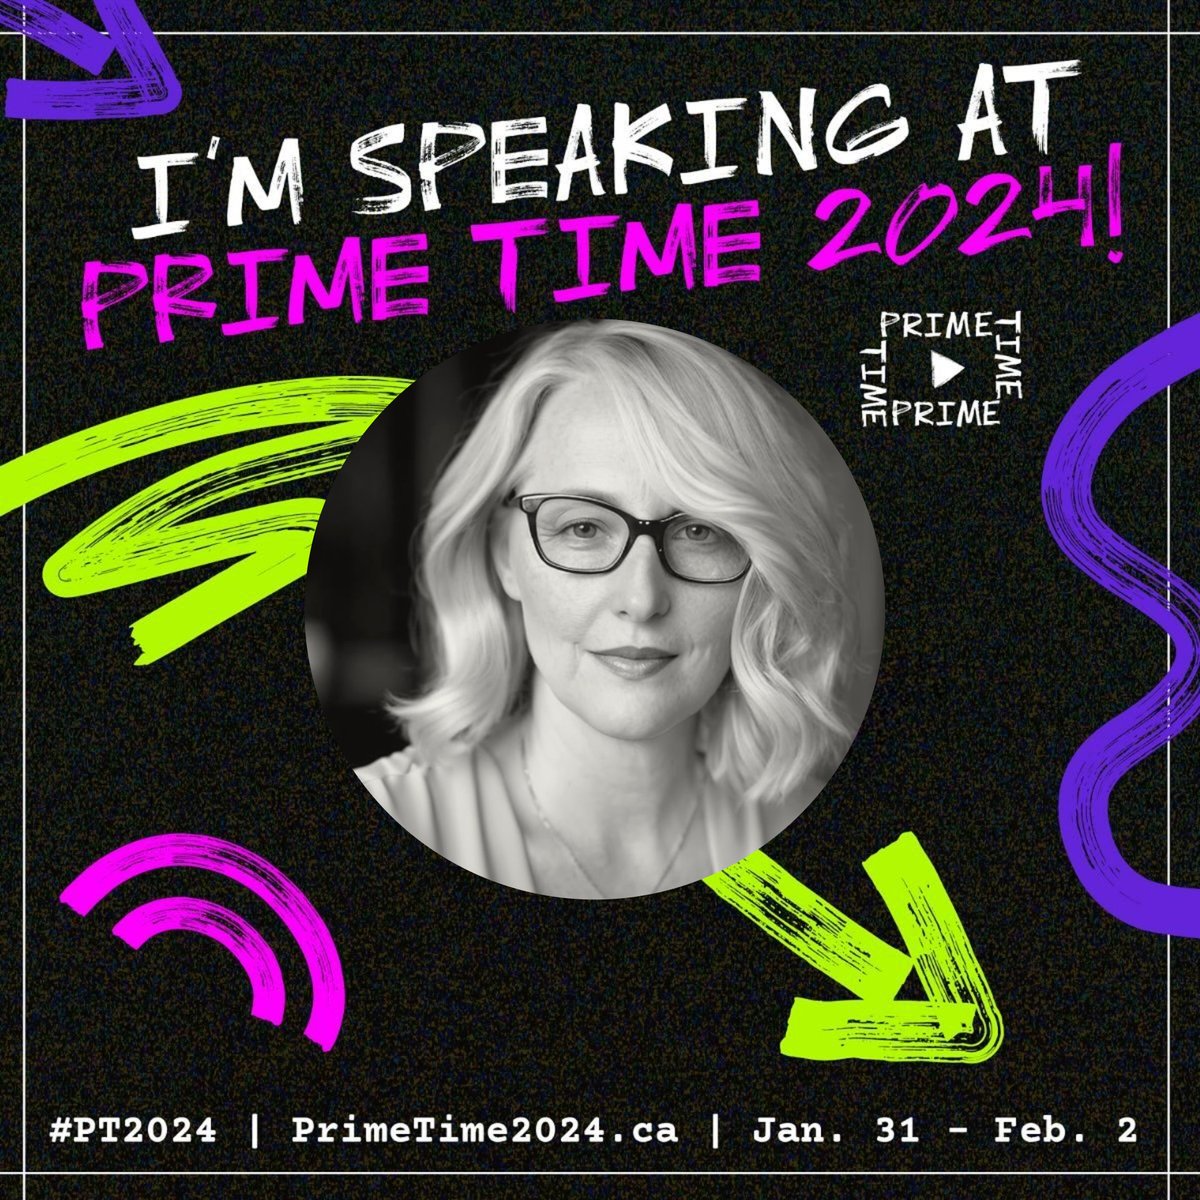 Marsha Newbery, our VP, Sustainability & Business Affairs Prime Time workshop on 'Sustainable Synergy' 📅 Thursday, February 1, 2024 8:15 AM to 9:00 AM EST Prime Time attendees RSVP via the link below! ow.ly/CGUW50QuCNG #PT2024